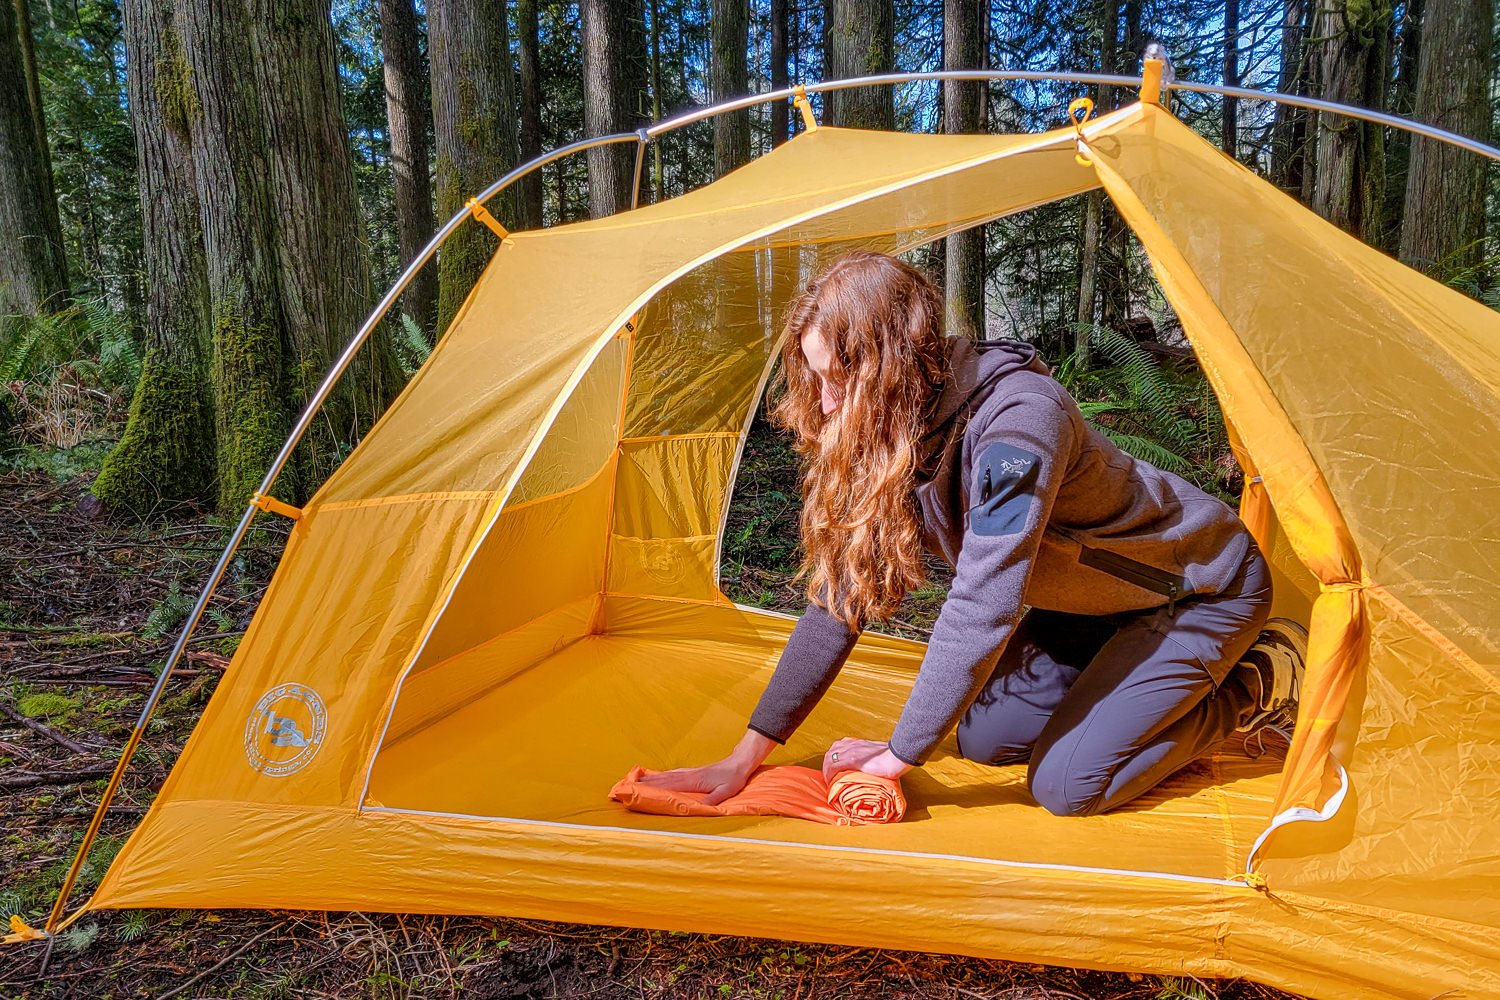 A hiker kneeling in a tent rolling up the Big Agnes Zoom UL